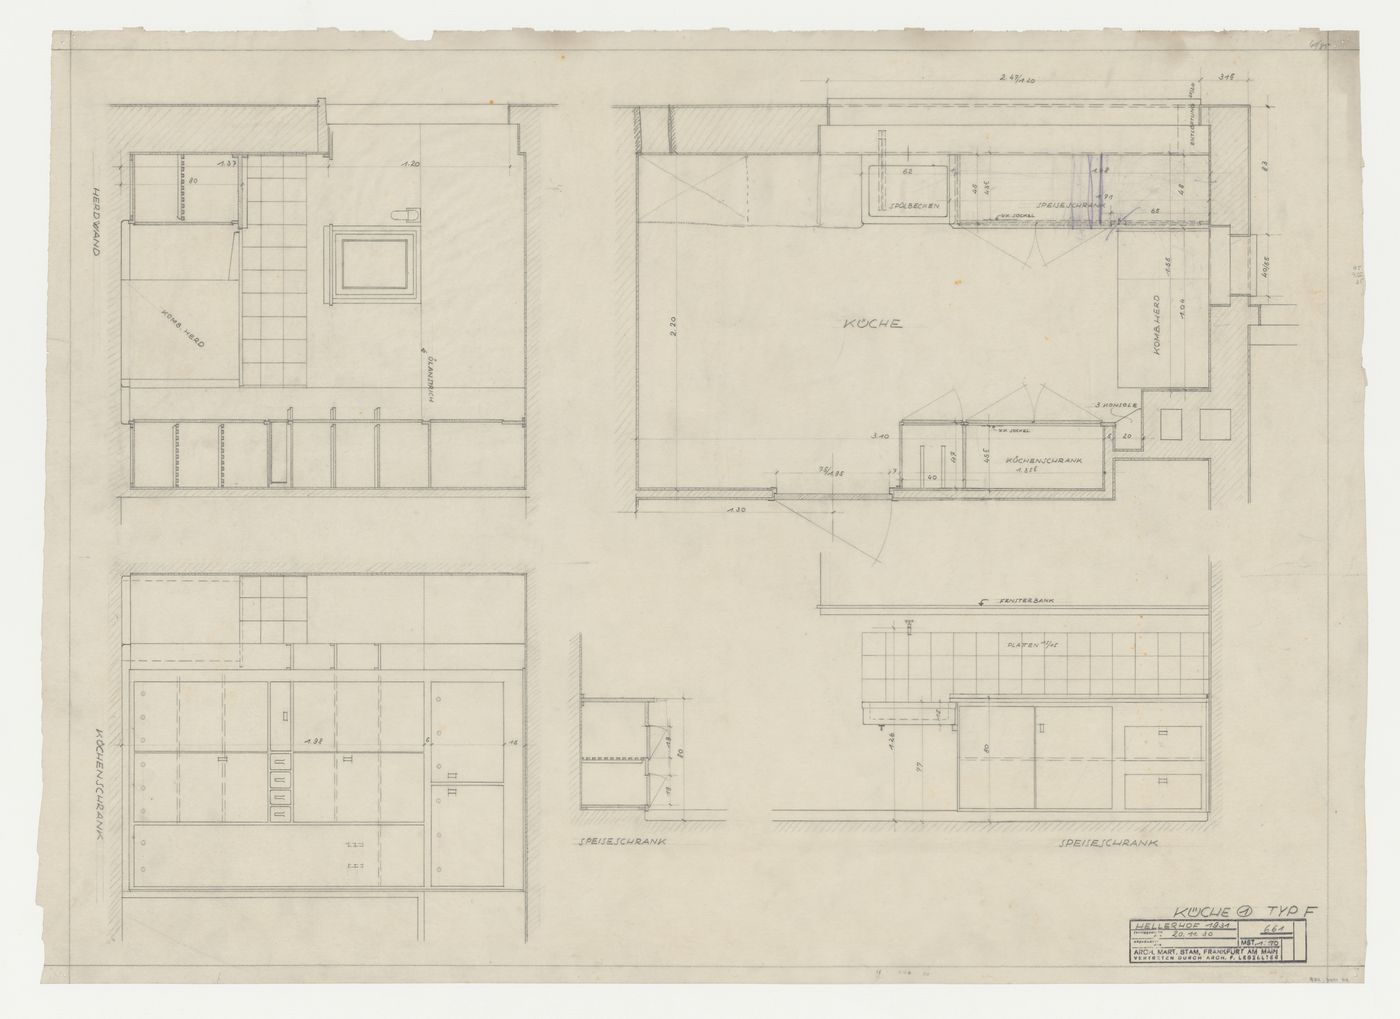 Plan and elevations for a type F kitchen for a housing unit, Hellerhof Housing Estate, Frankfurt am Main, Germany